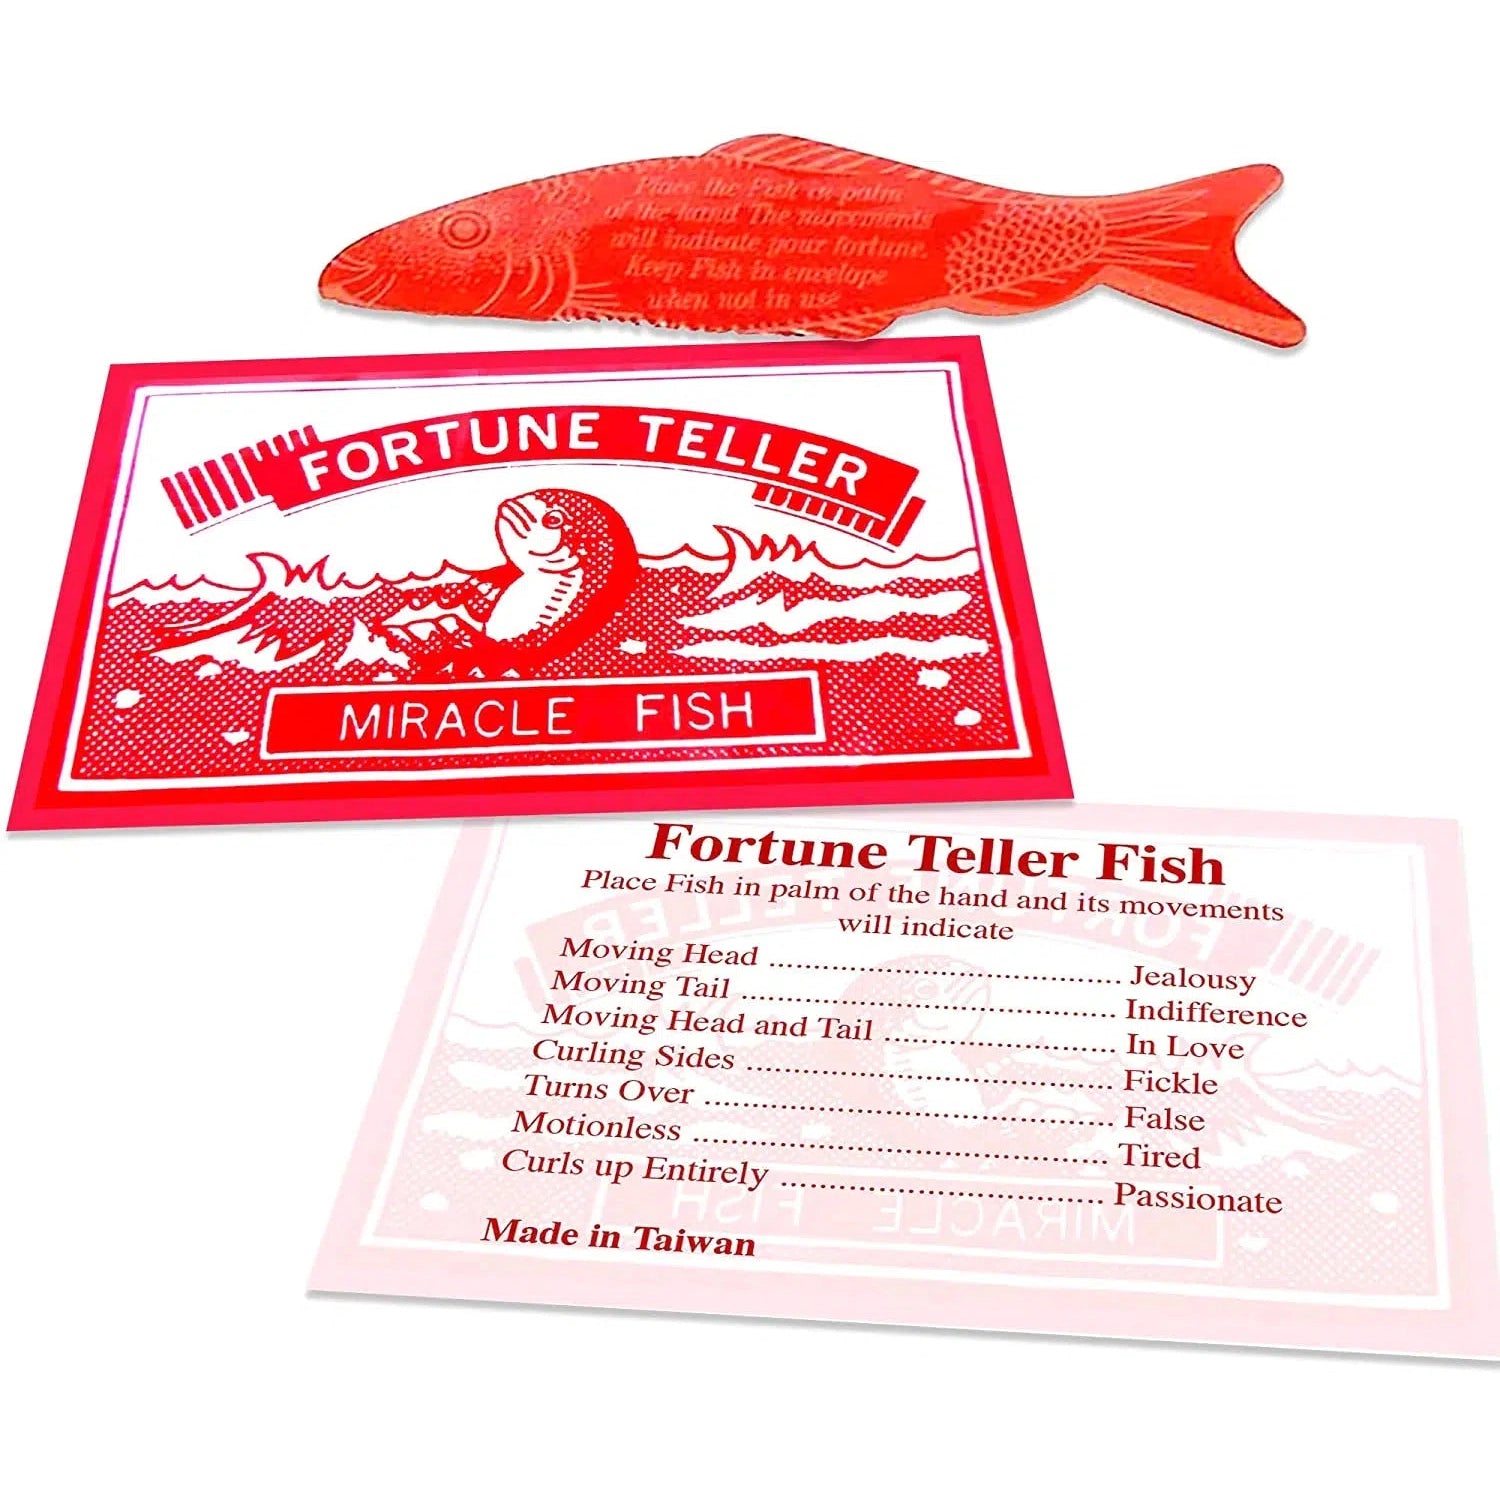 Front view of the package for a fortune fish.